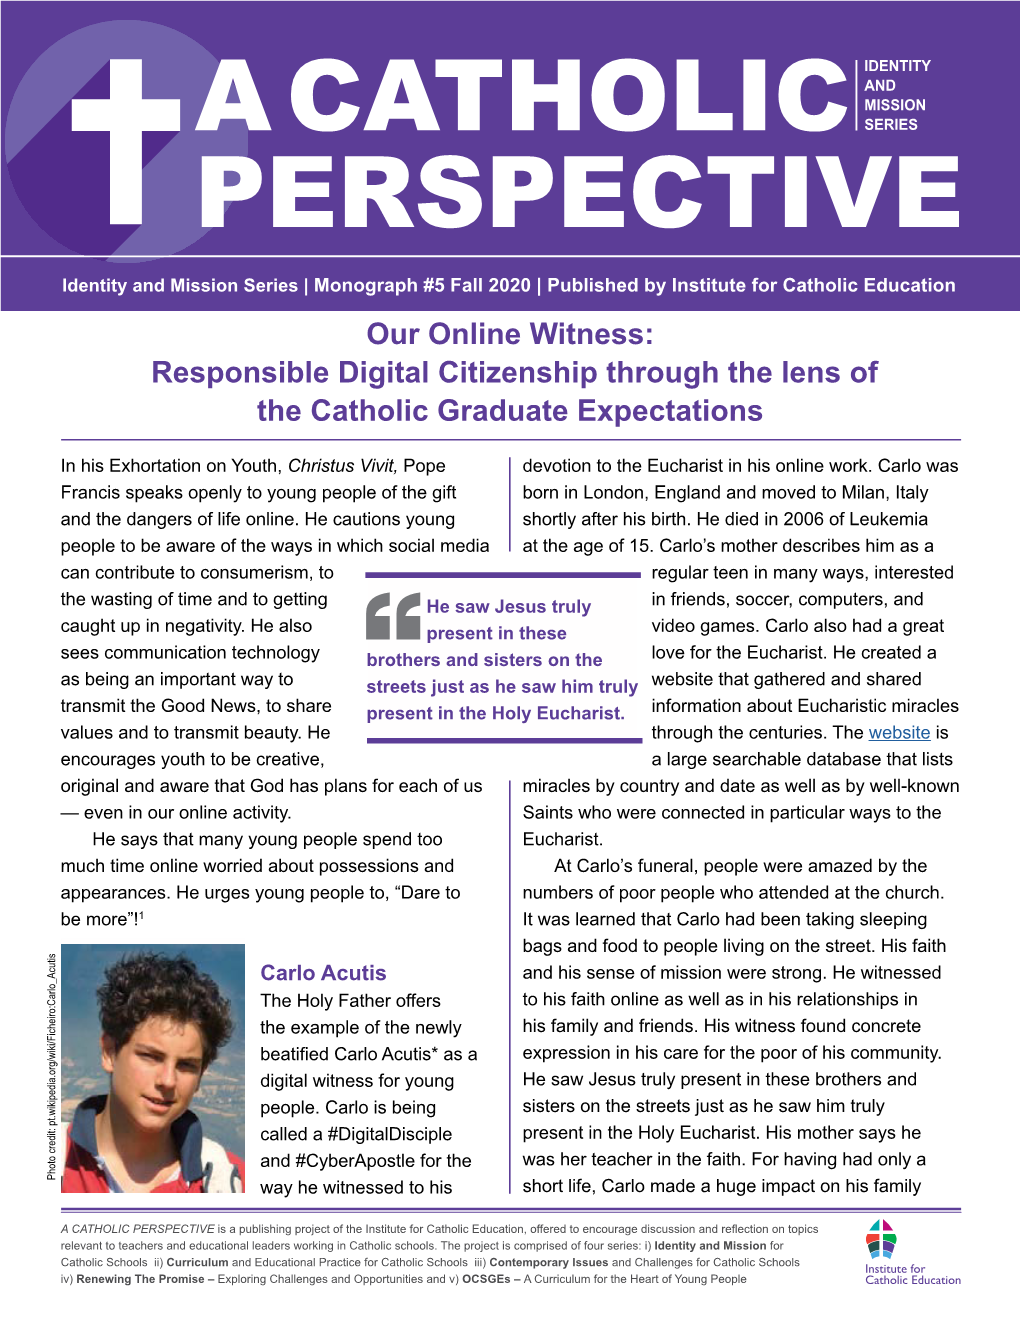 Our Online Witness: Responsible Digital Citizenship Through the Lens of the Catholic Graduate Expectations